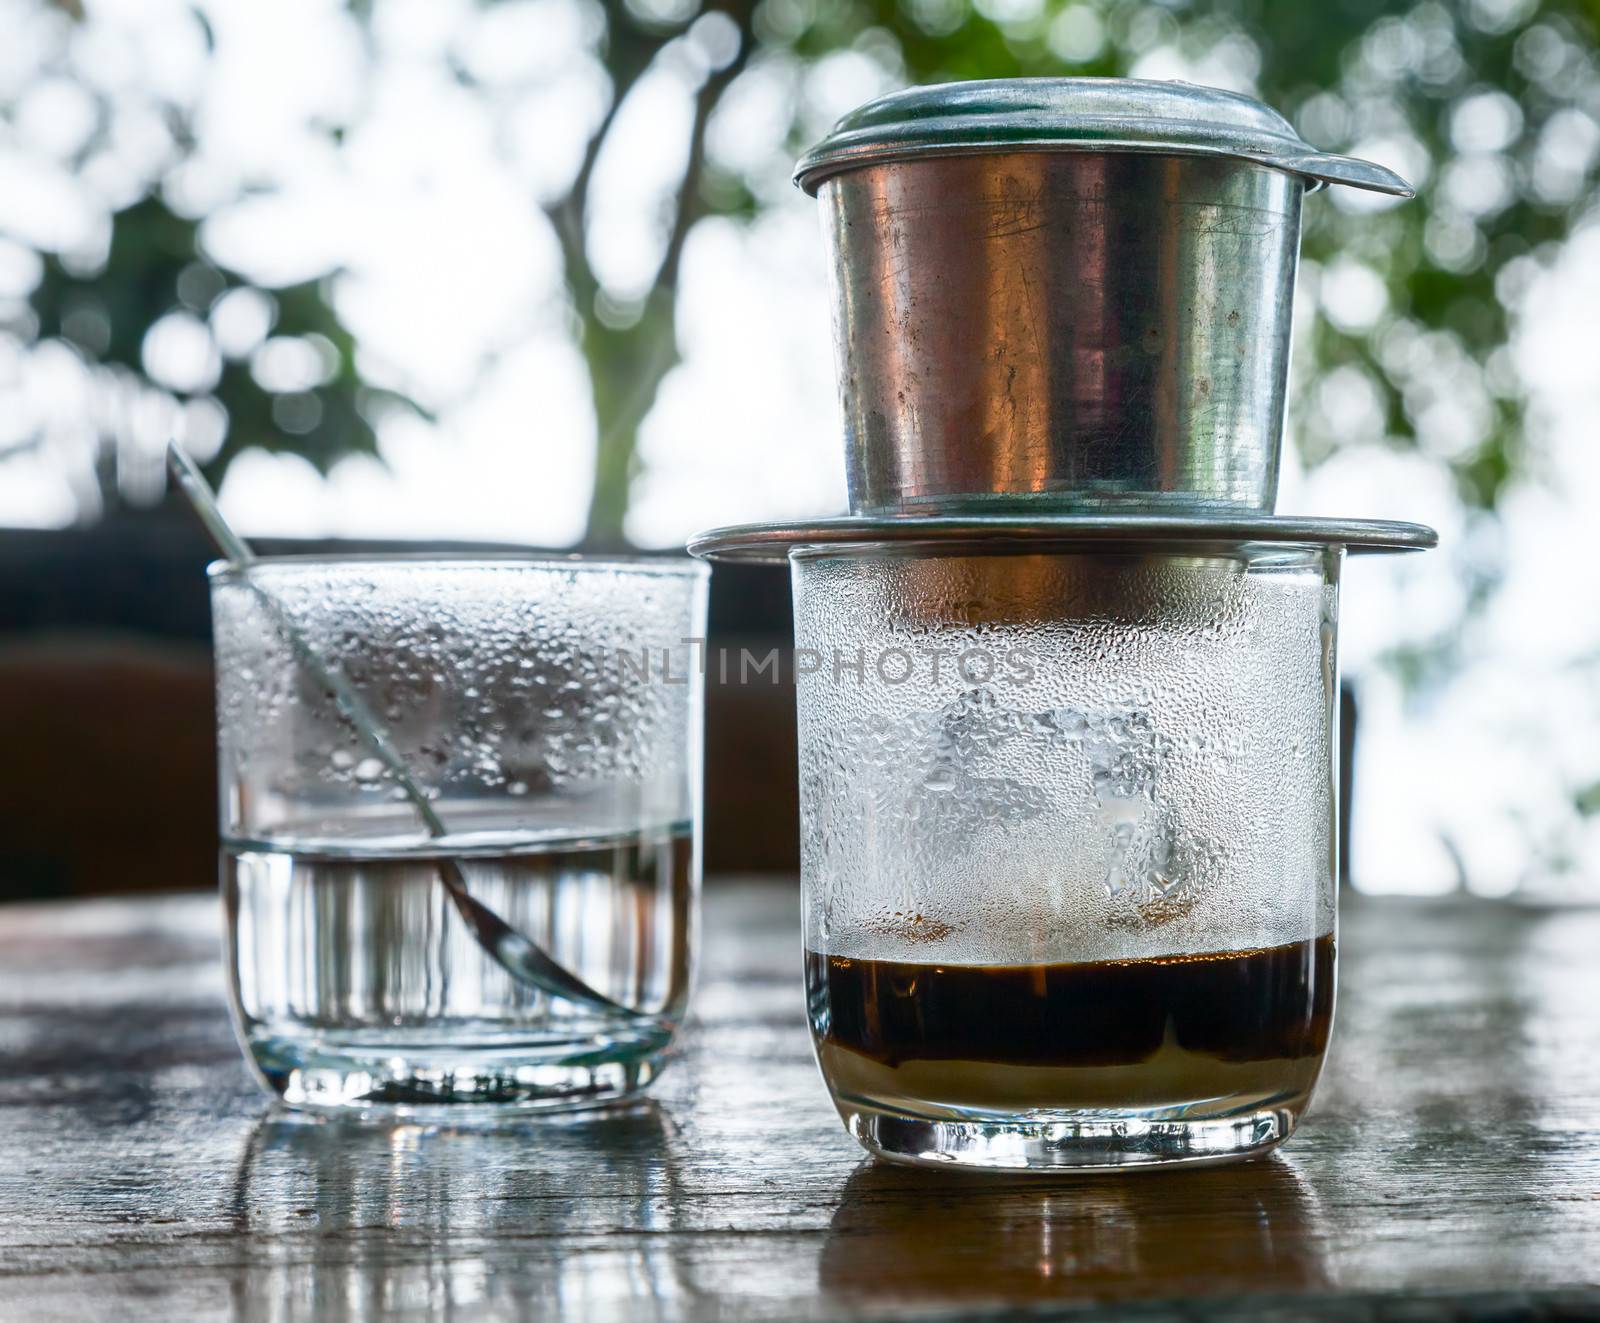 Coffee brewed in traditional vietnamese style